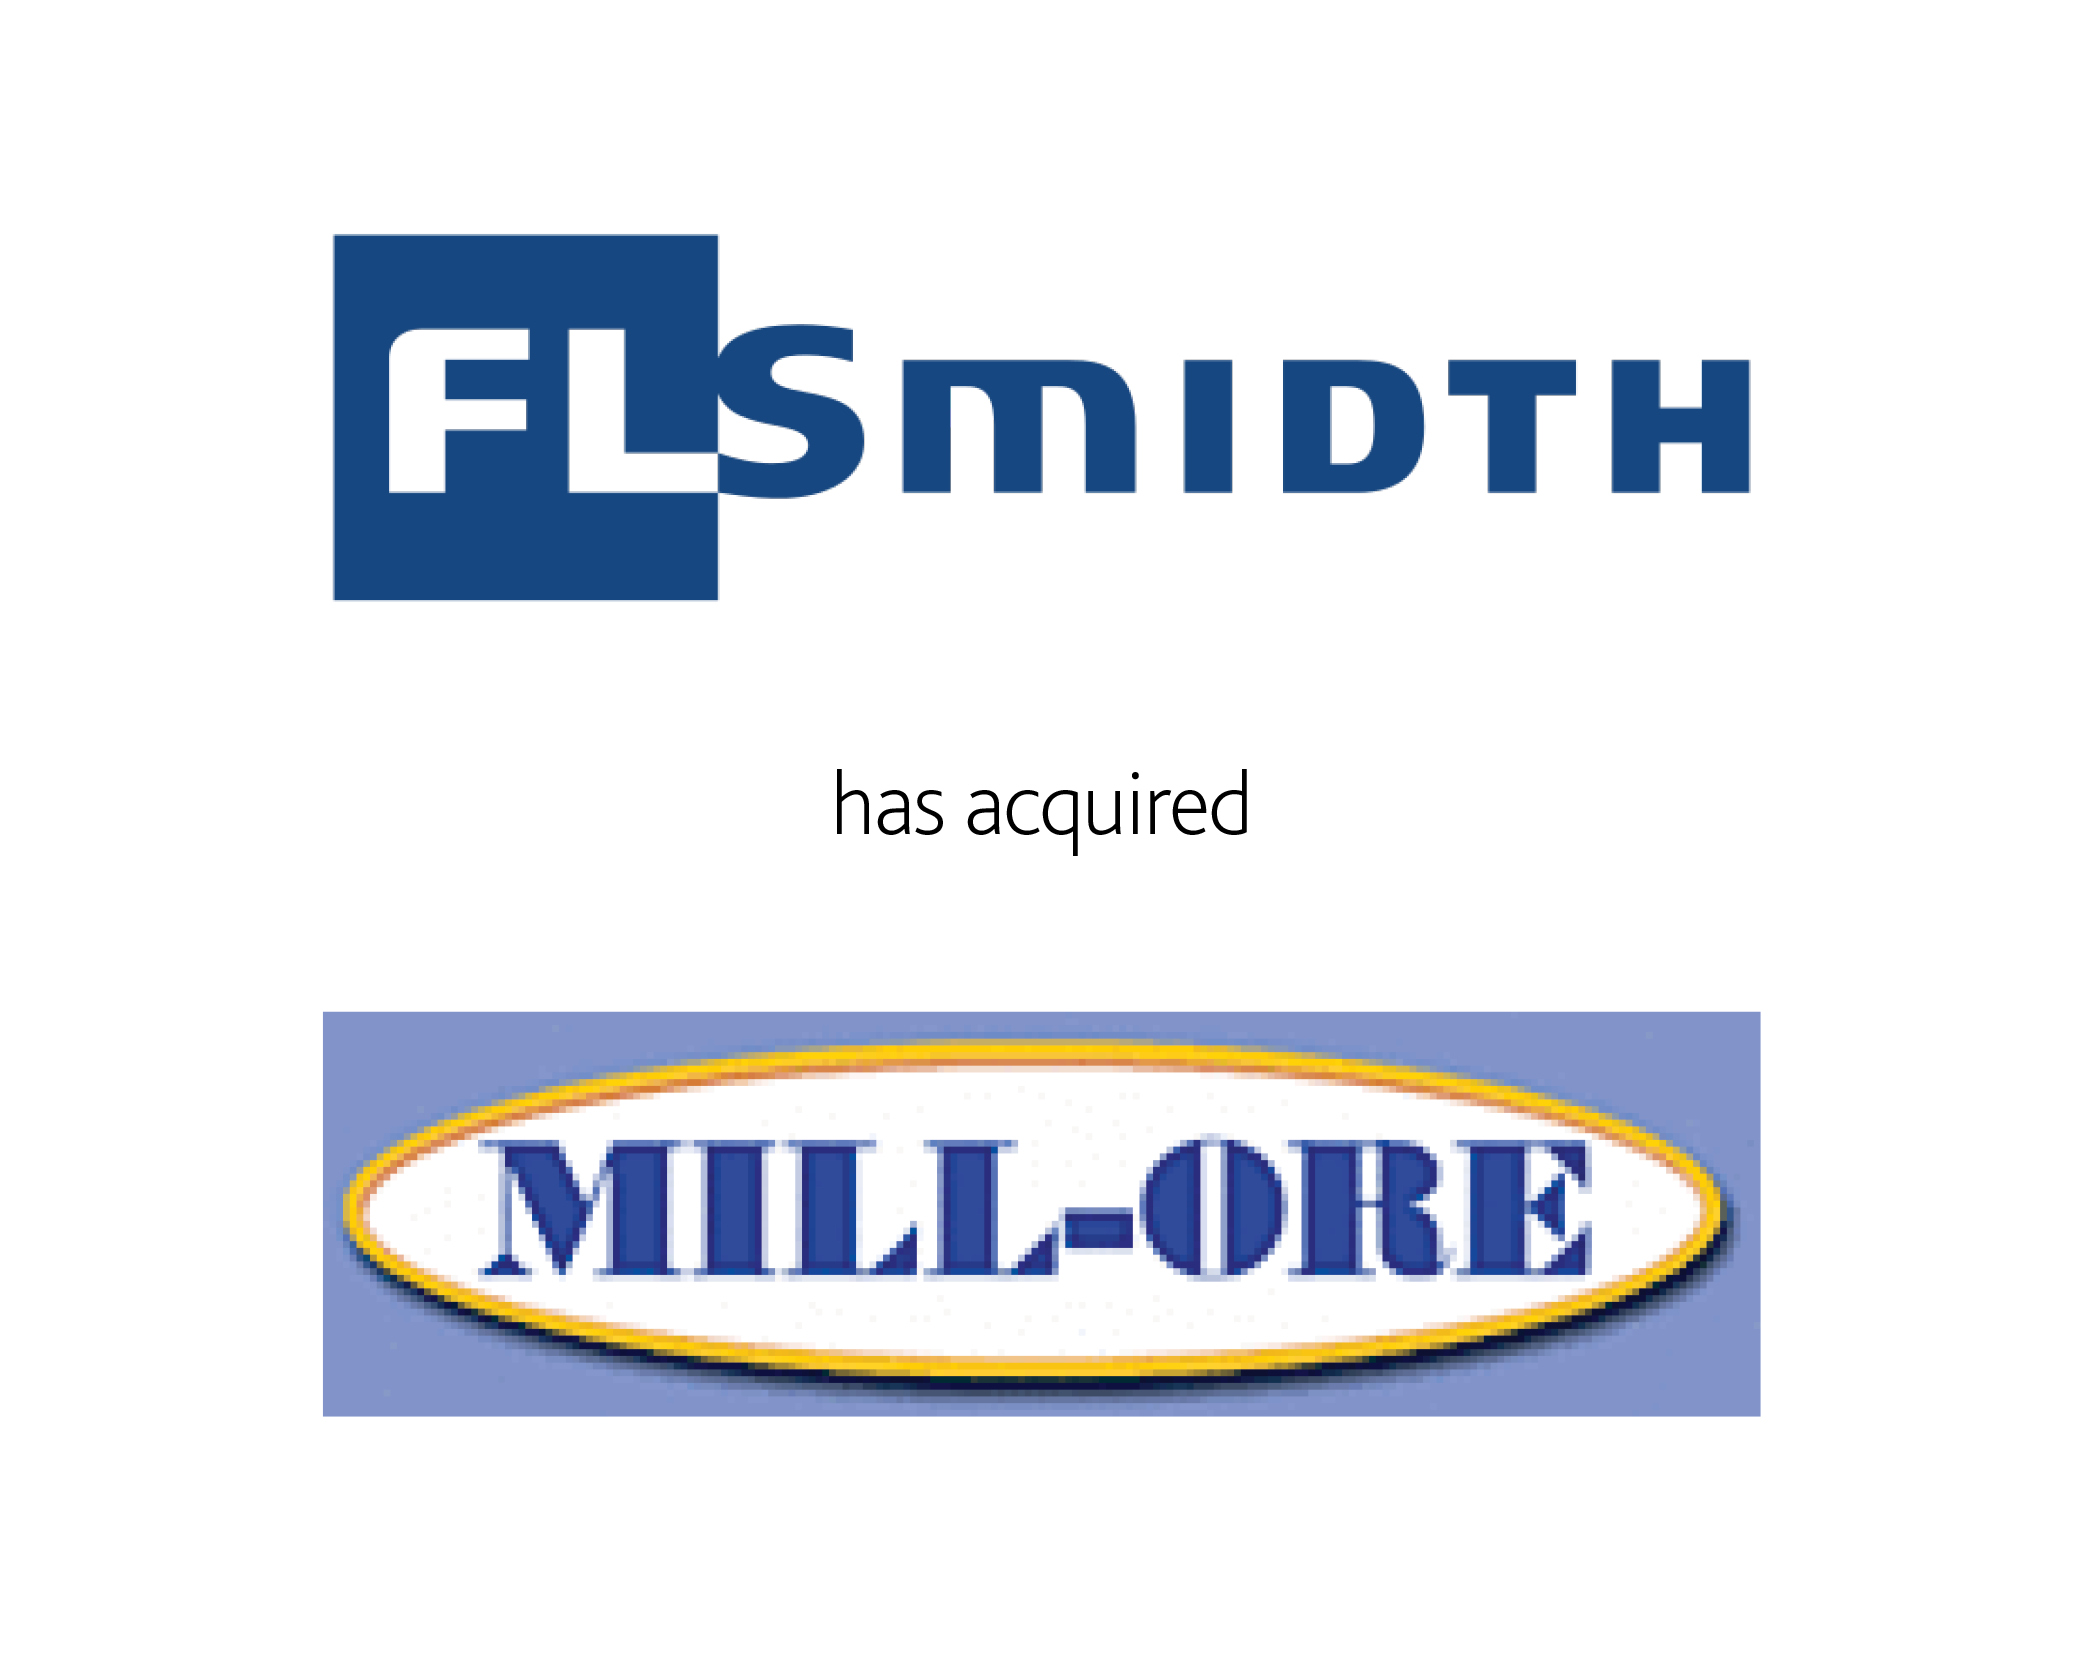 FLSmidth has acquired Mill-Ore